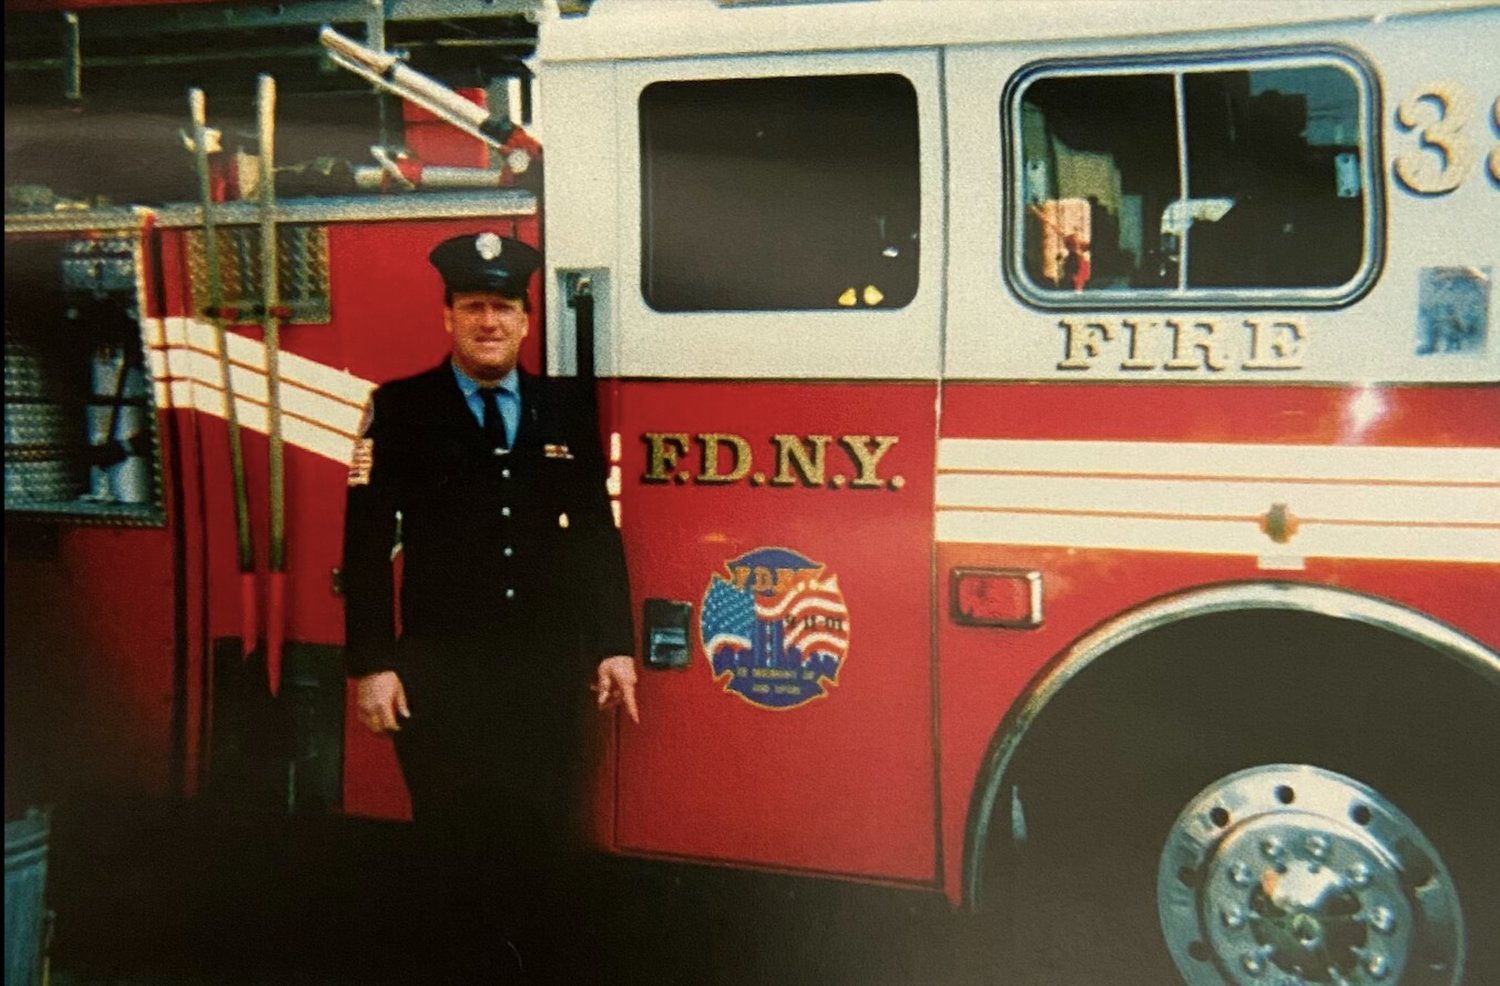 Daniel Monahan was an FDNY firefighter for many years before retiring in 1998. On July 9, Lydia Lane in Salisbury was dedicated in memory of him.